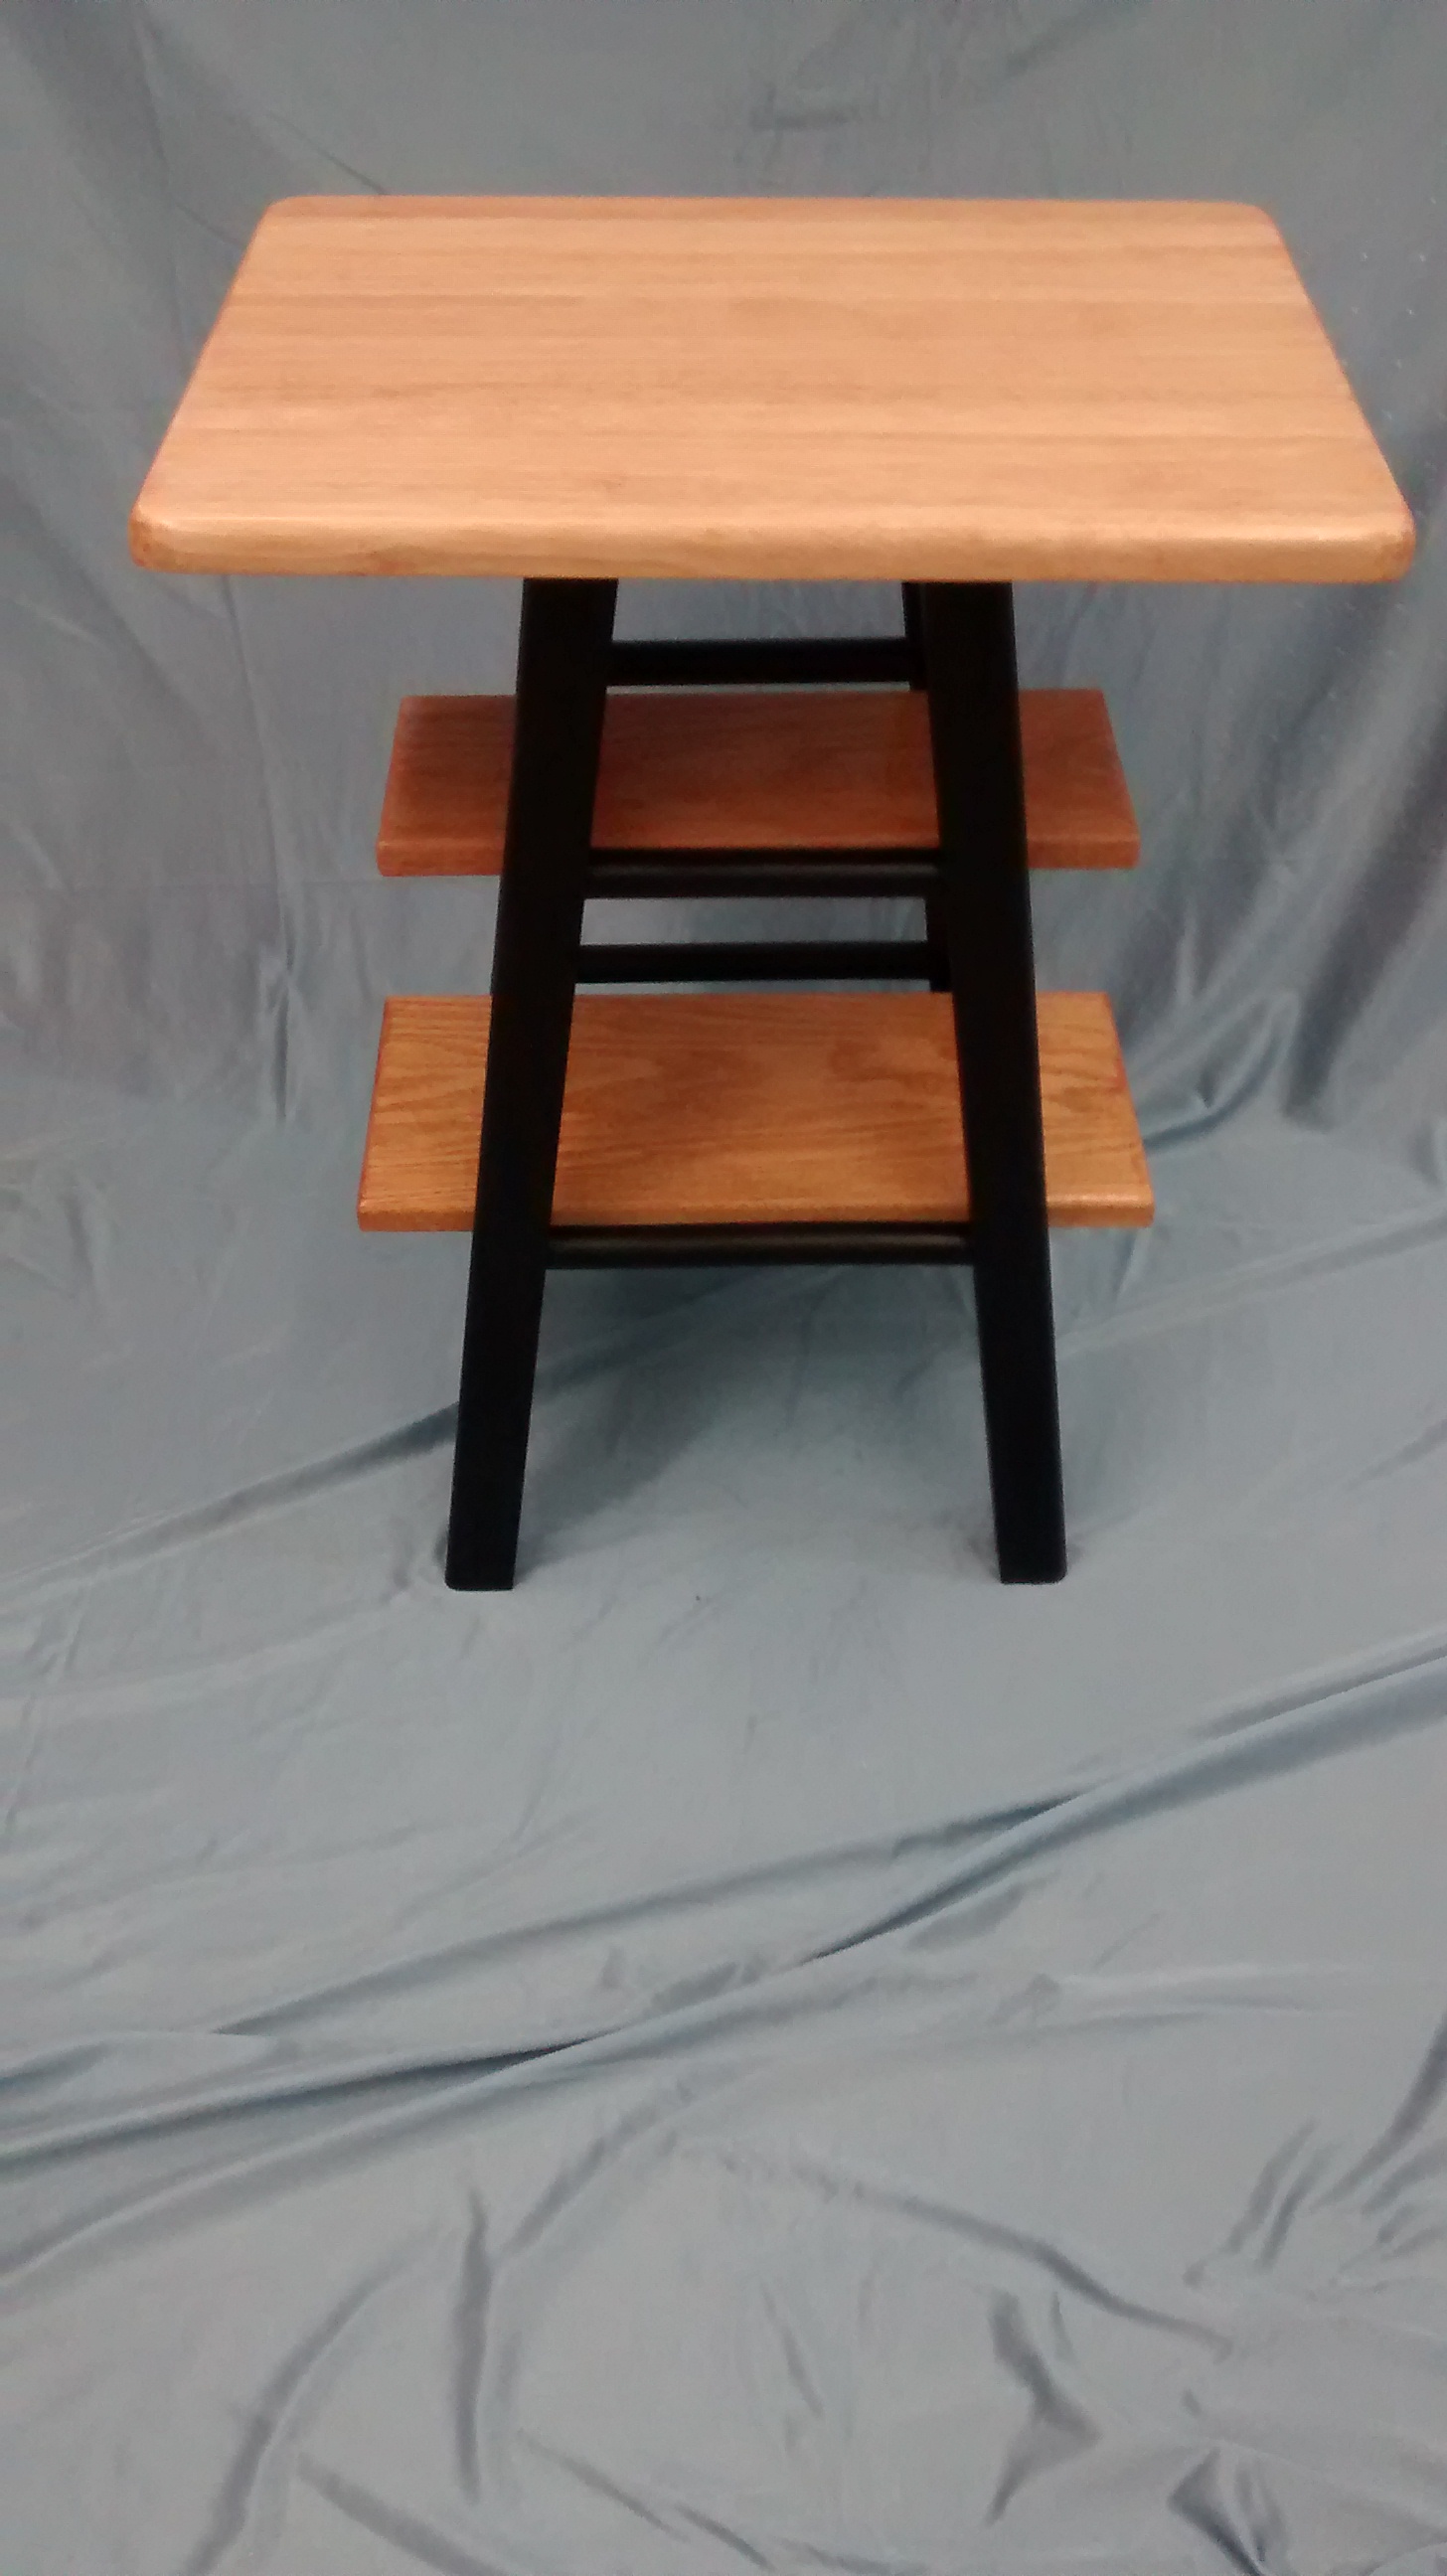 End or Side Table Made from One Wooden Bar Stool and Reclaimed Wood